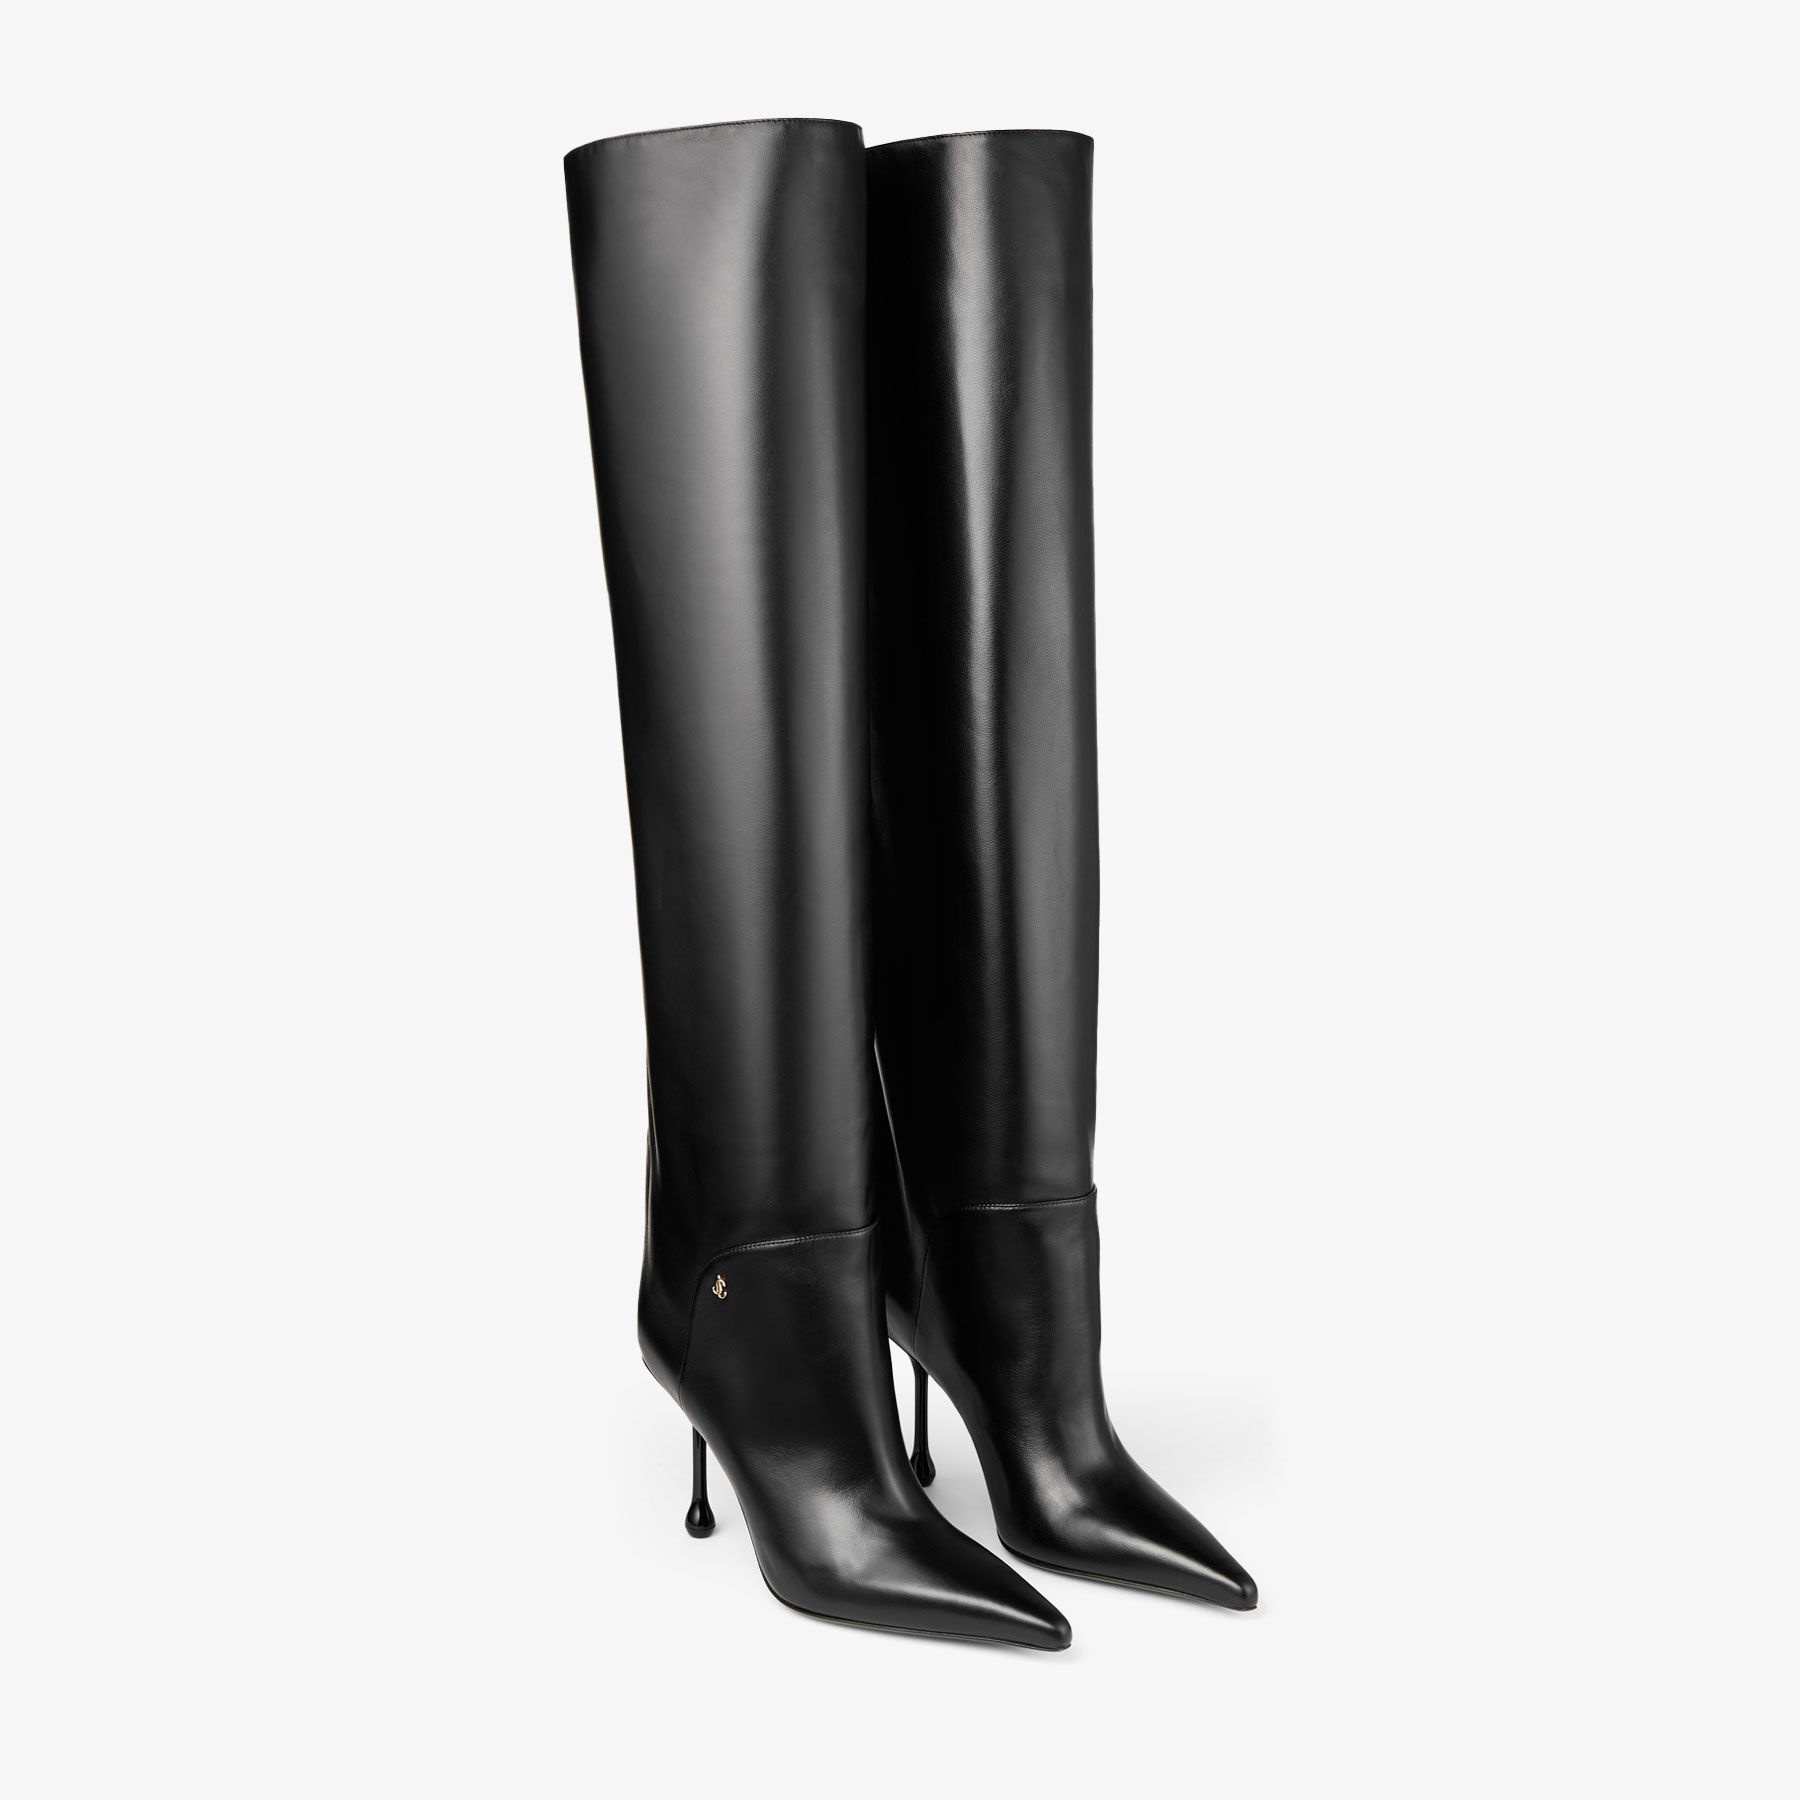 Cycas Knee Boot 95
Black Nappa Leather Knee-High Boots - 3